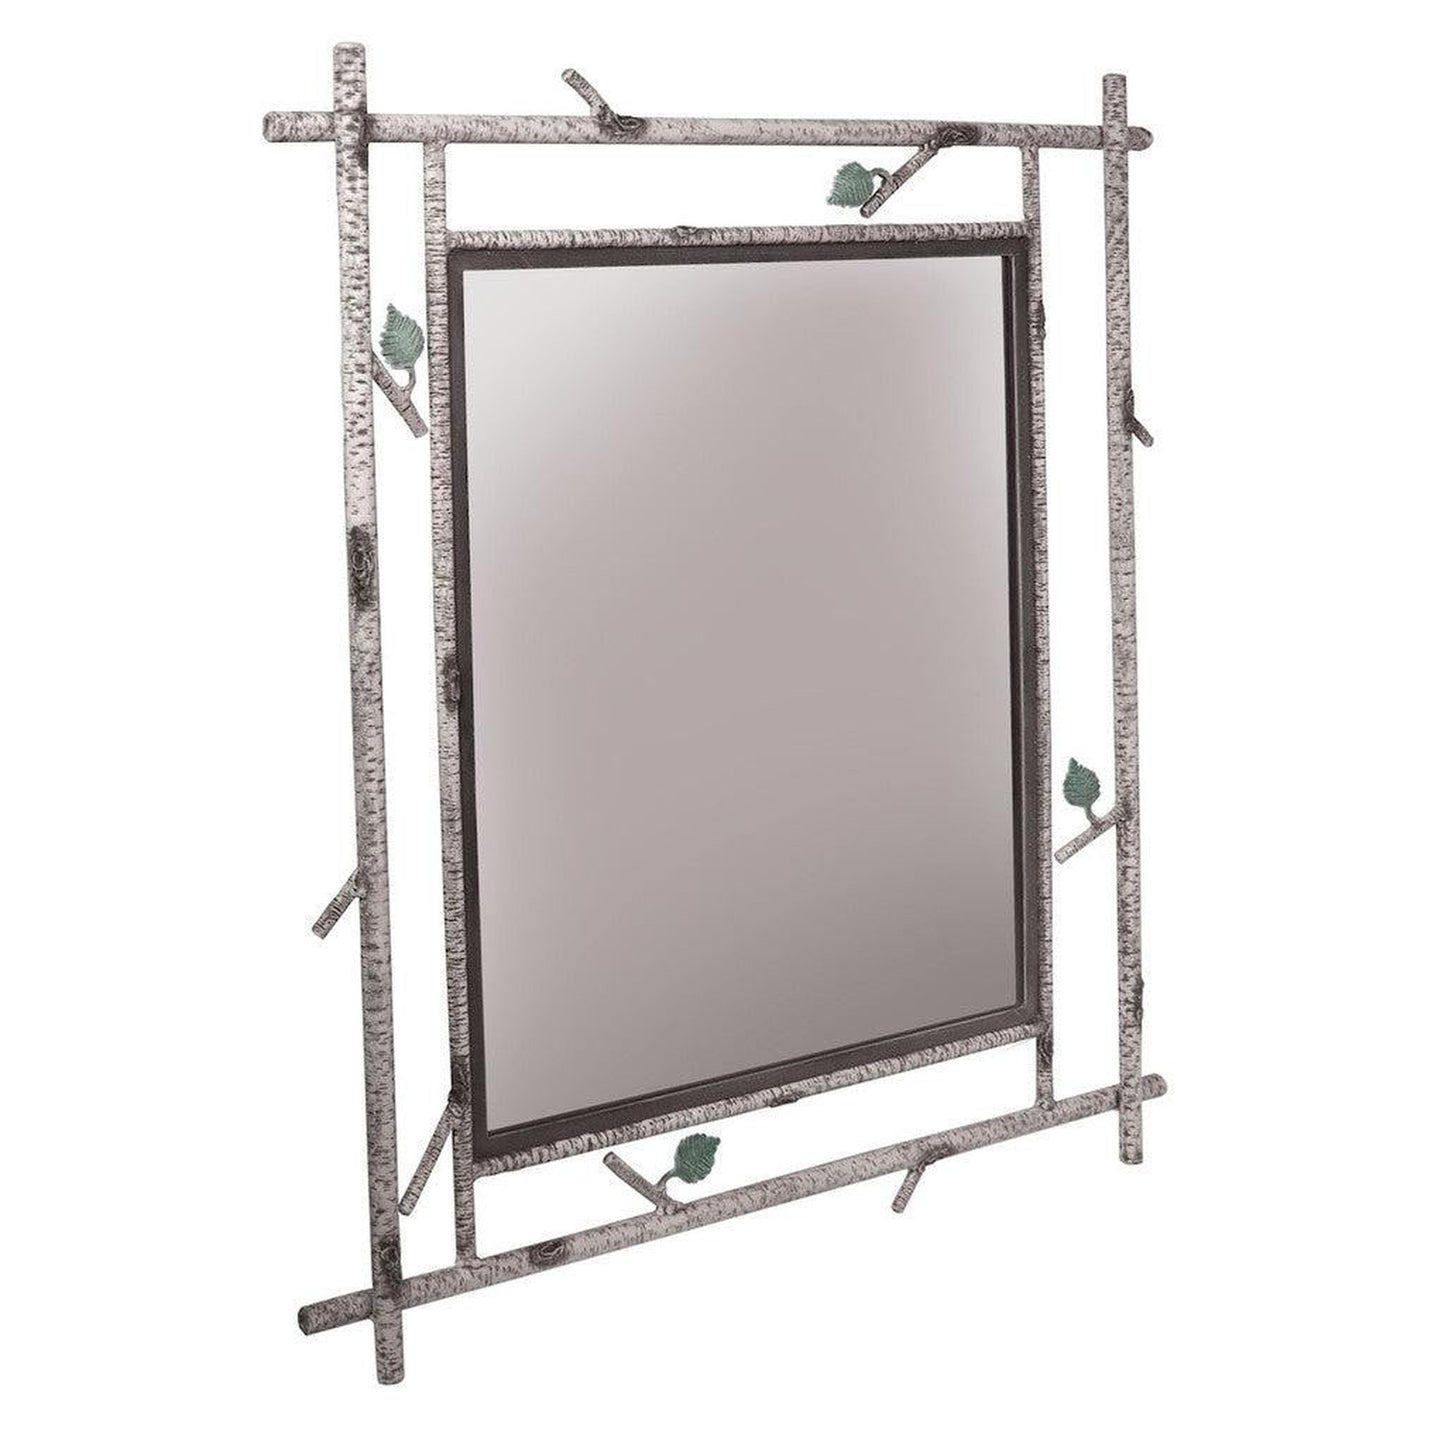 Stone County Ironworks Whisper Creek 35" x 47" Large Hand Rubbed Brass Iron Wall Mirror With Pewter Iron Accent